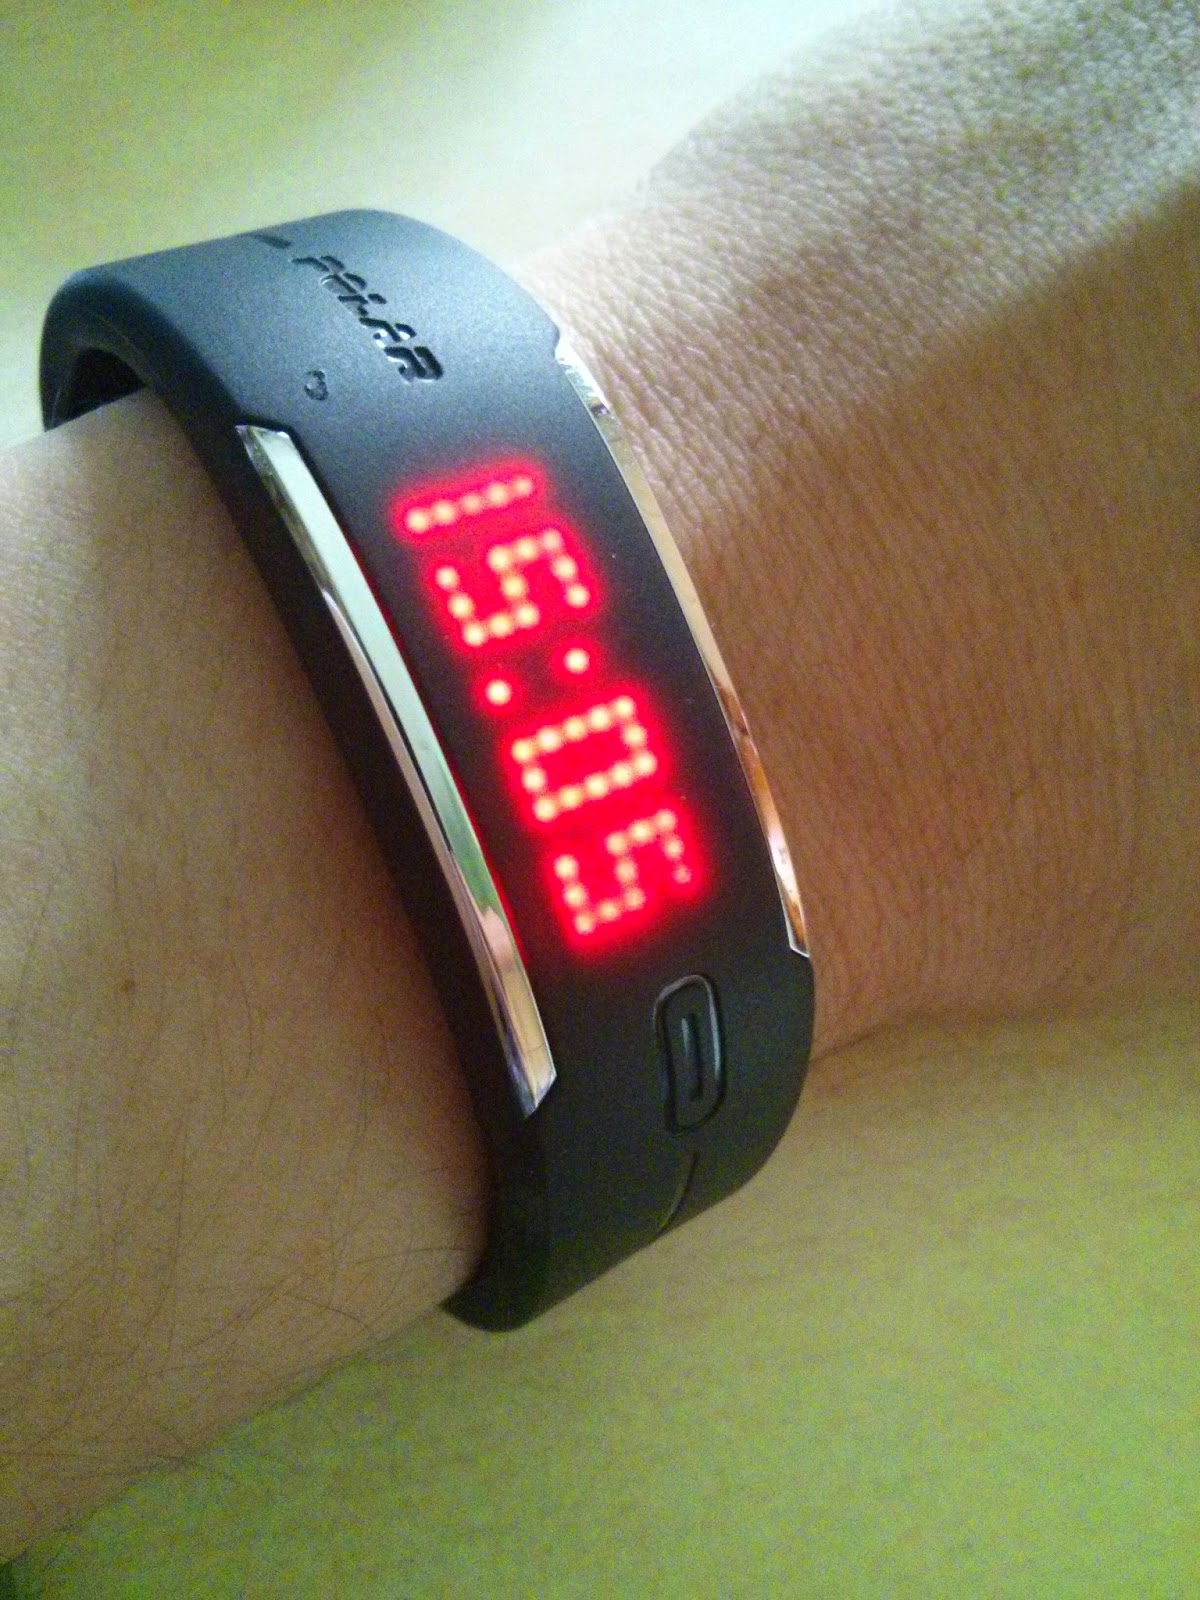 Tips for devs: Polar LOOP fitness tracker: review